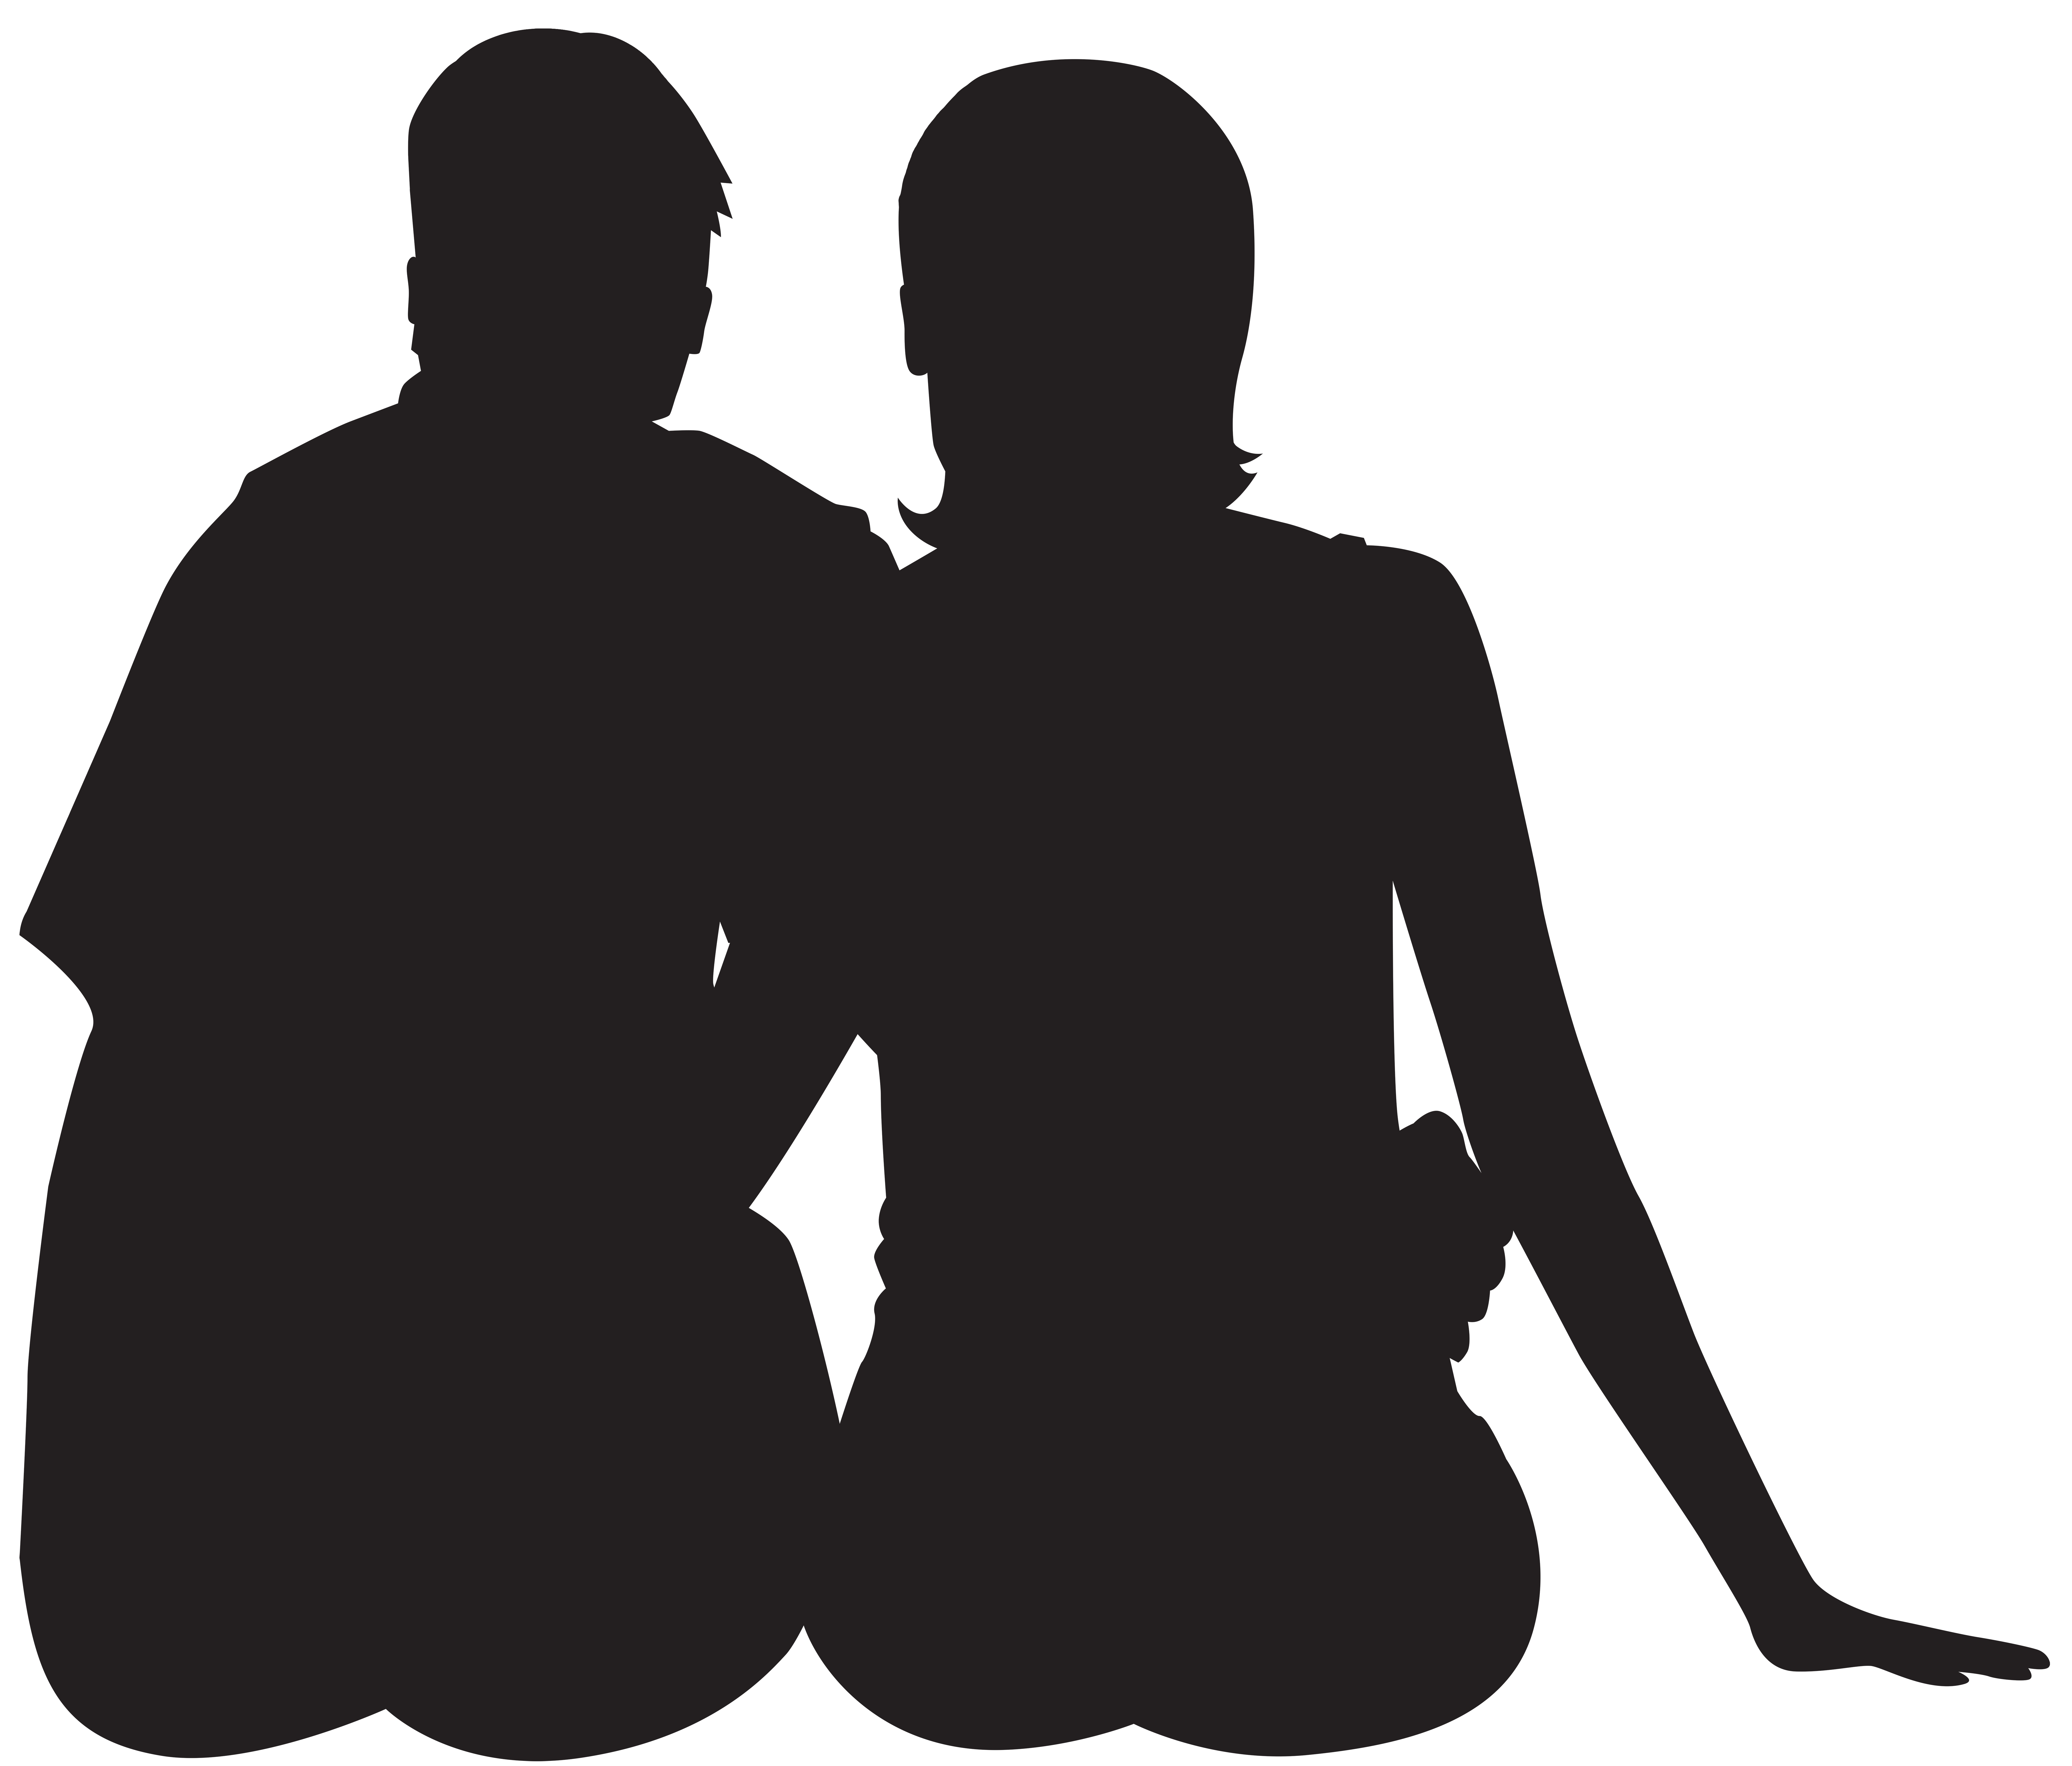 Sitting couple silhouette.